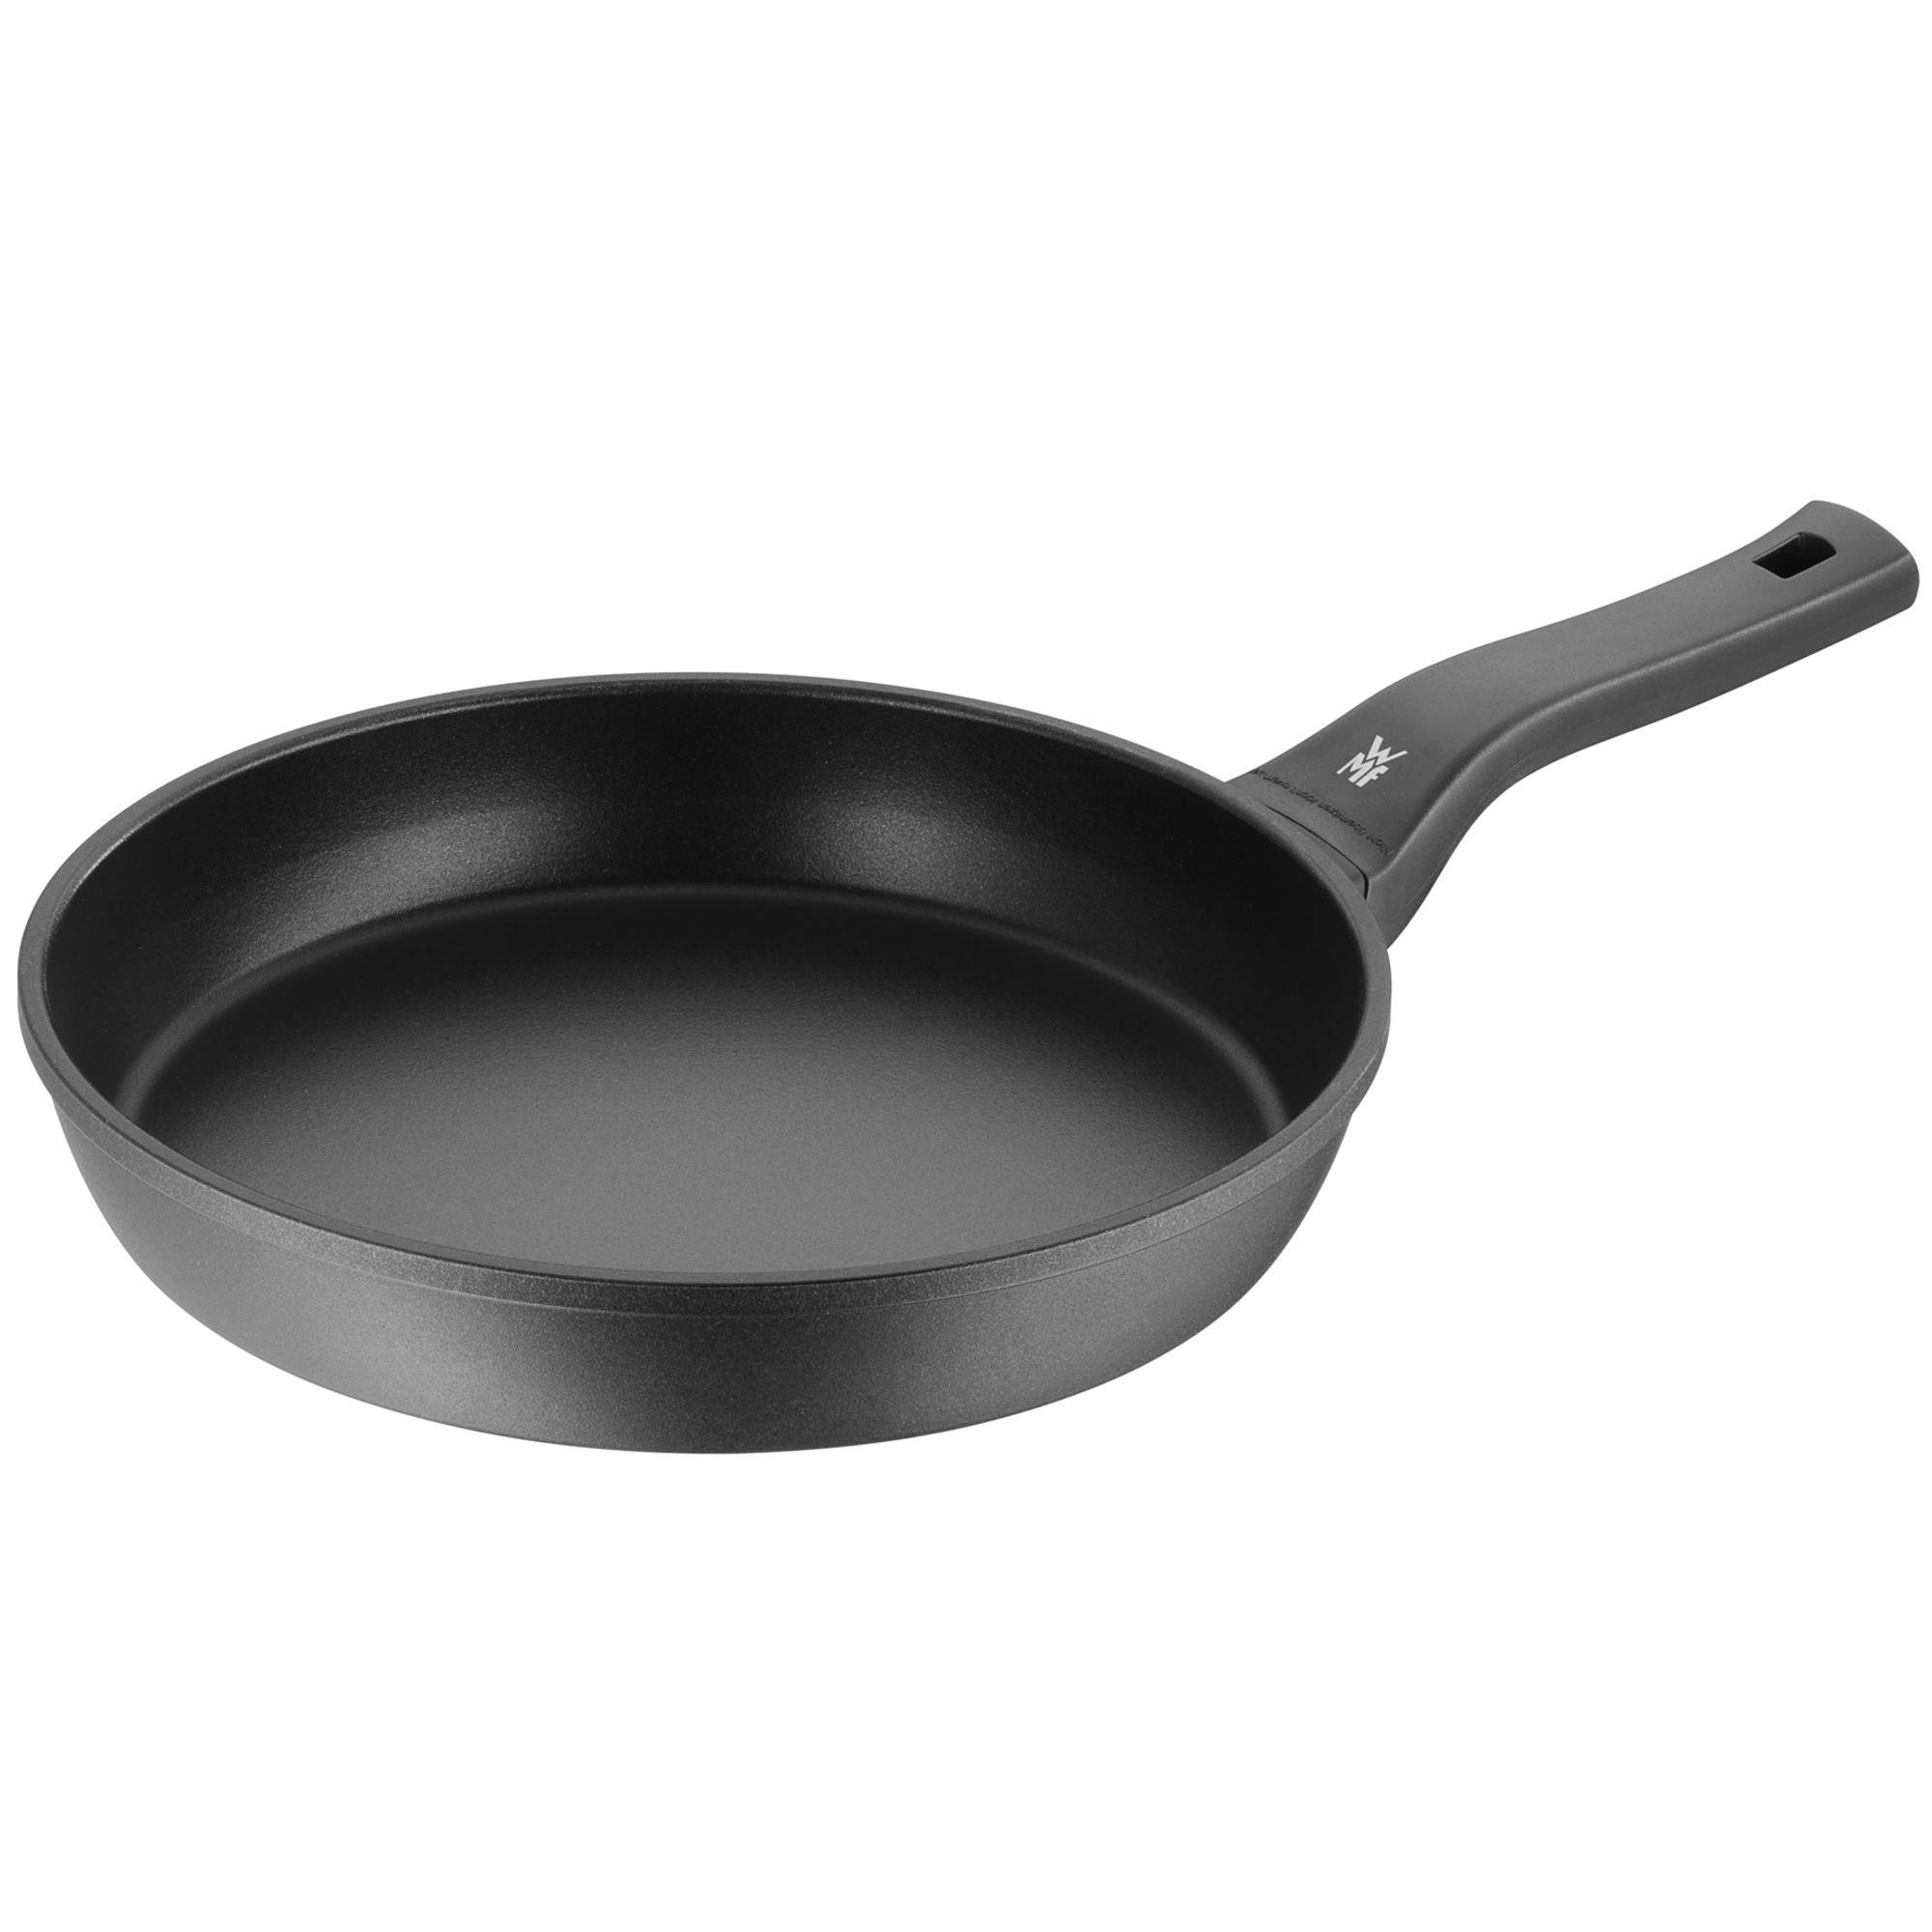 Fry and stew like a professional with WMF pans